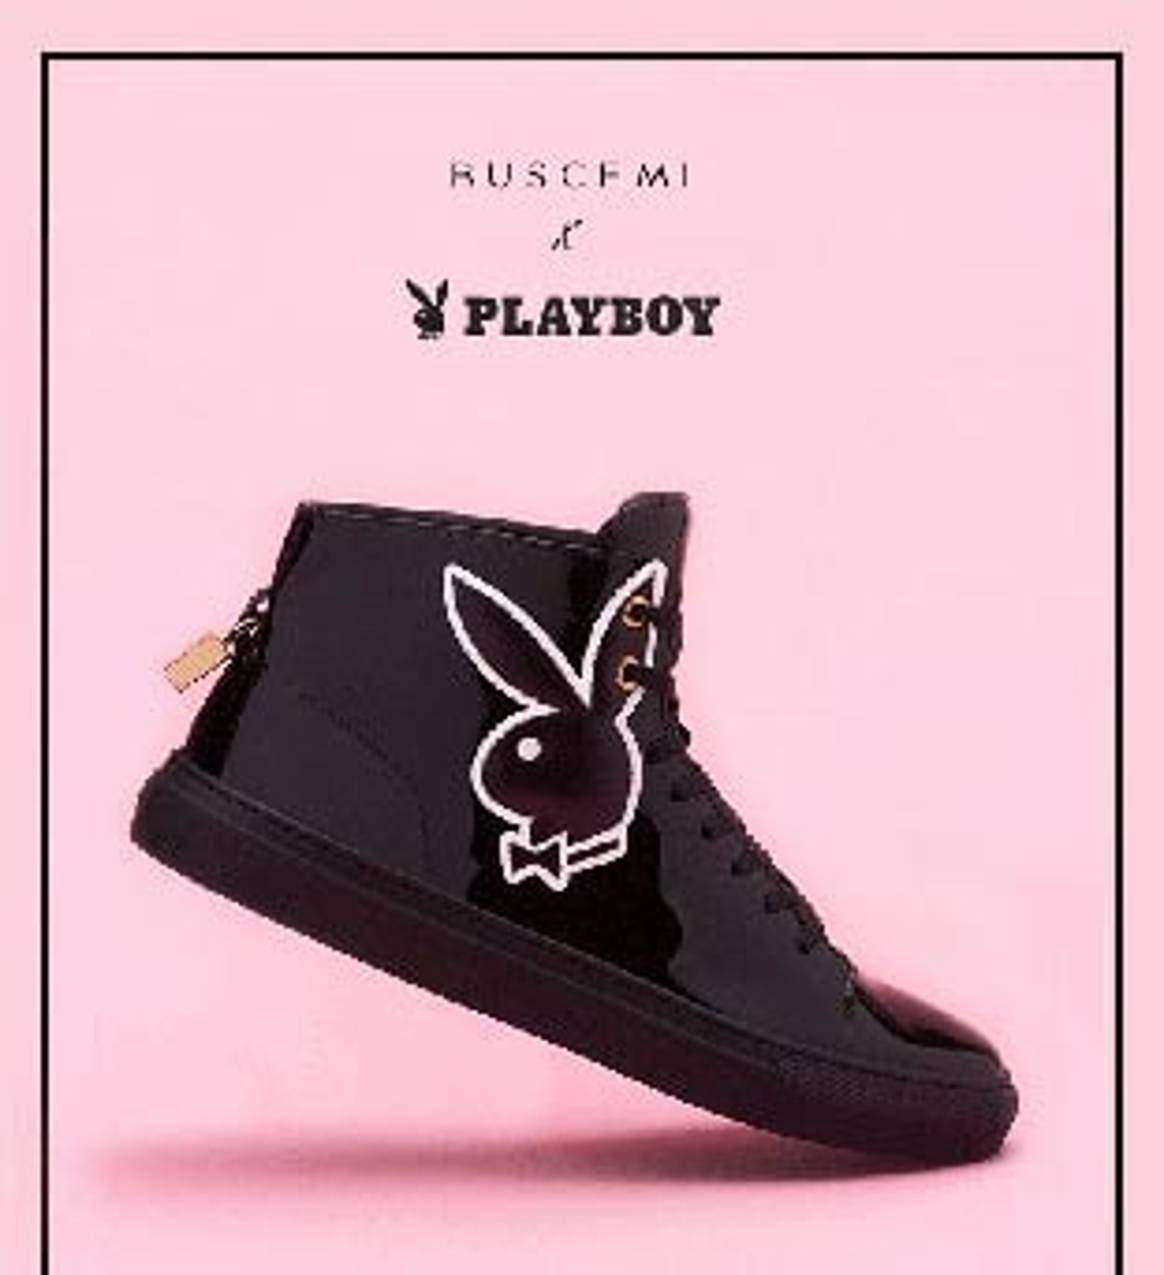 Playboy X BUSCEMI Collab Launch and More!